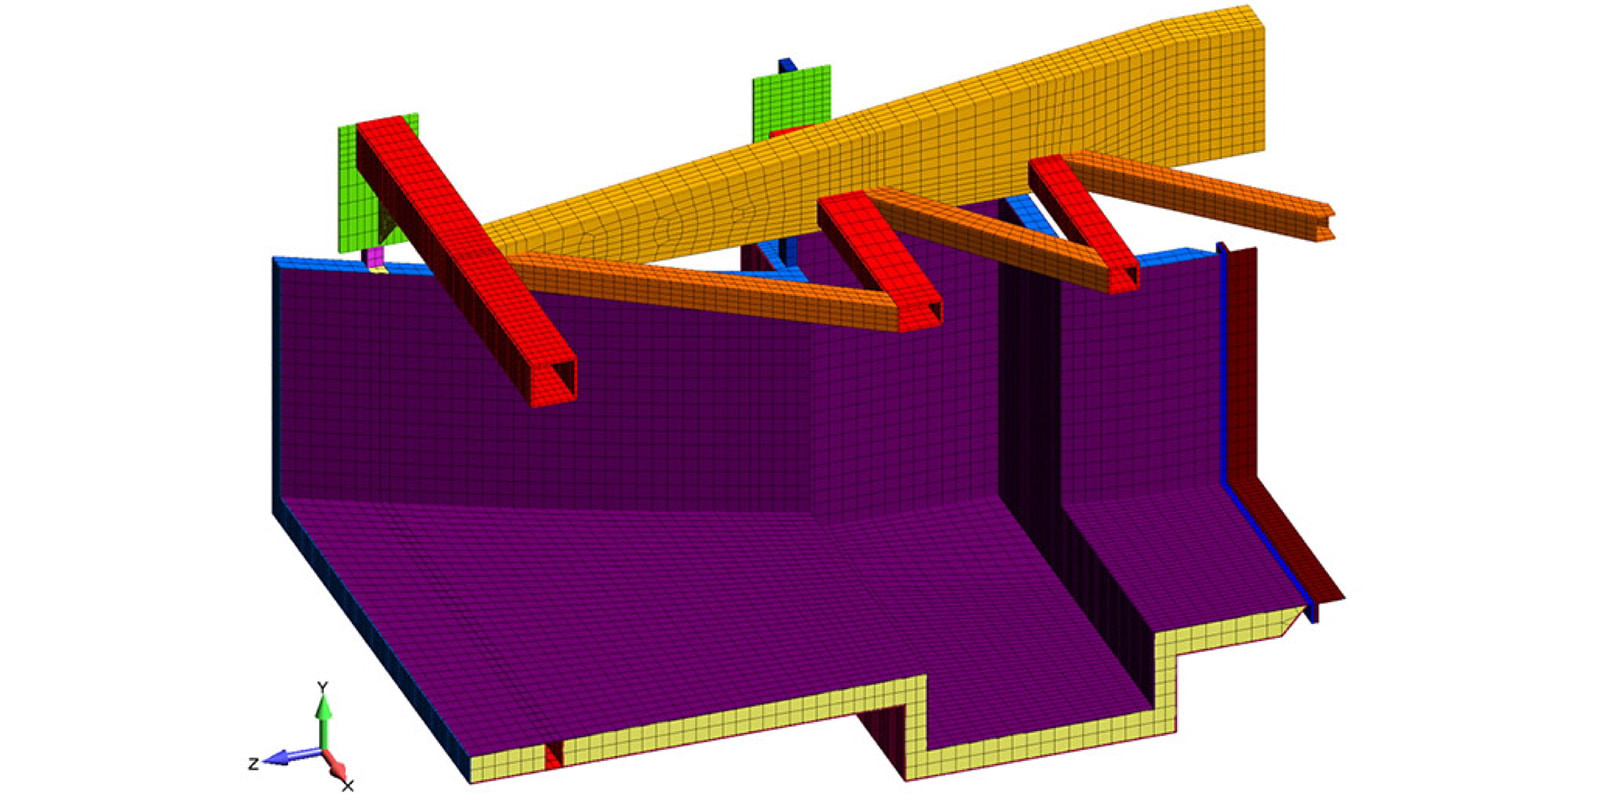 A cross section cut of the FEA model illustrating the combined use of plate and solid elements to simulate the foam core composite structure - Predictive Engineering FEA Composite Services